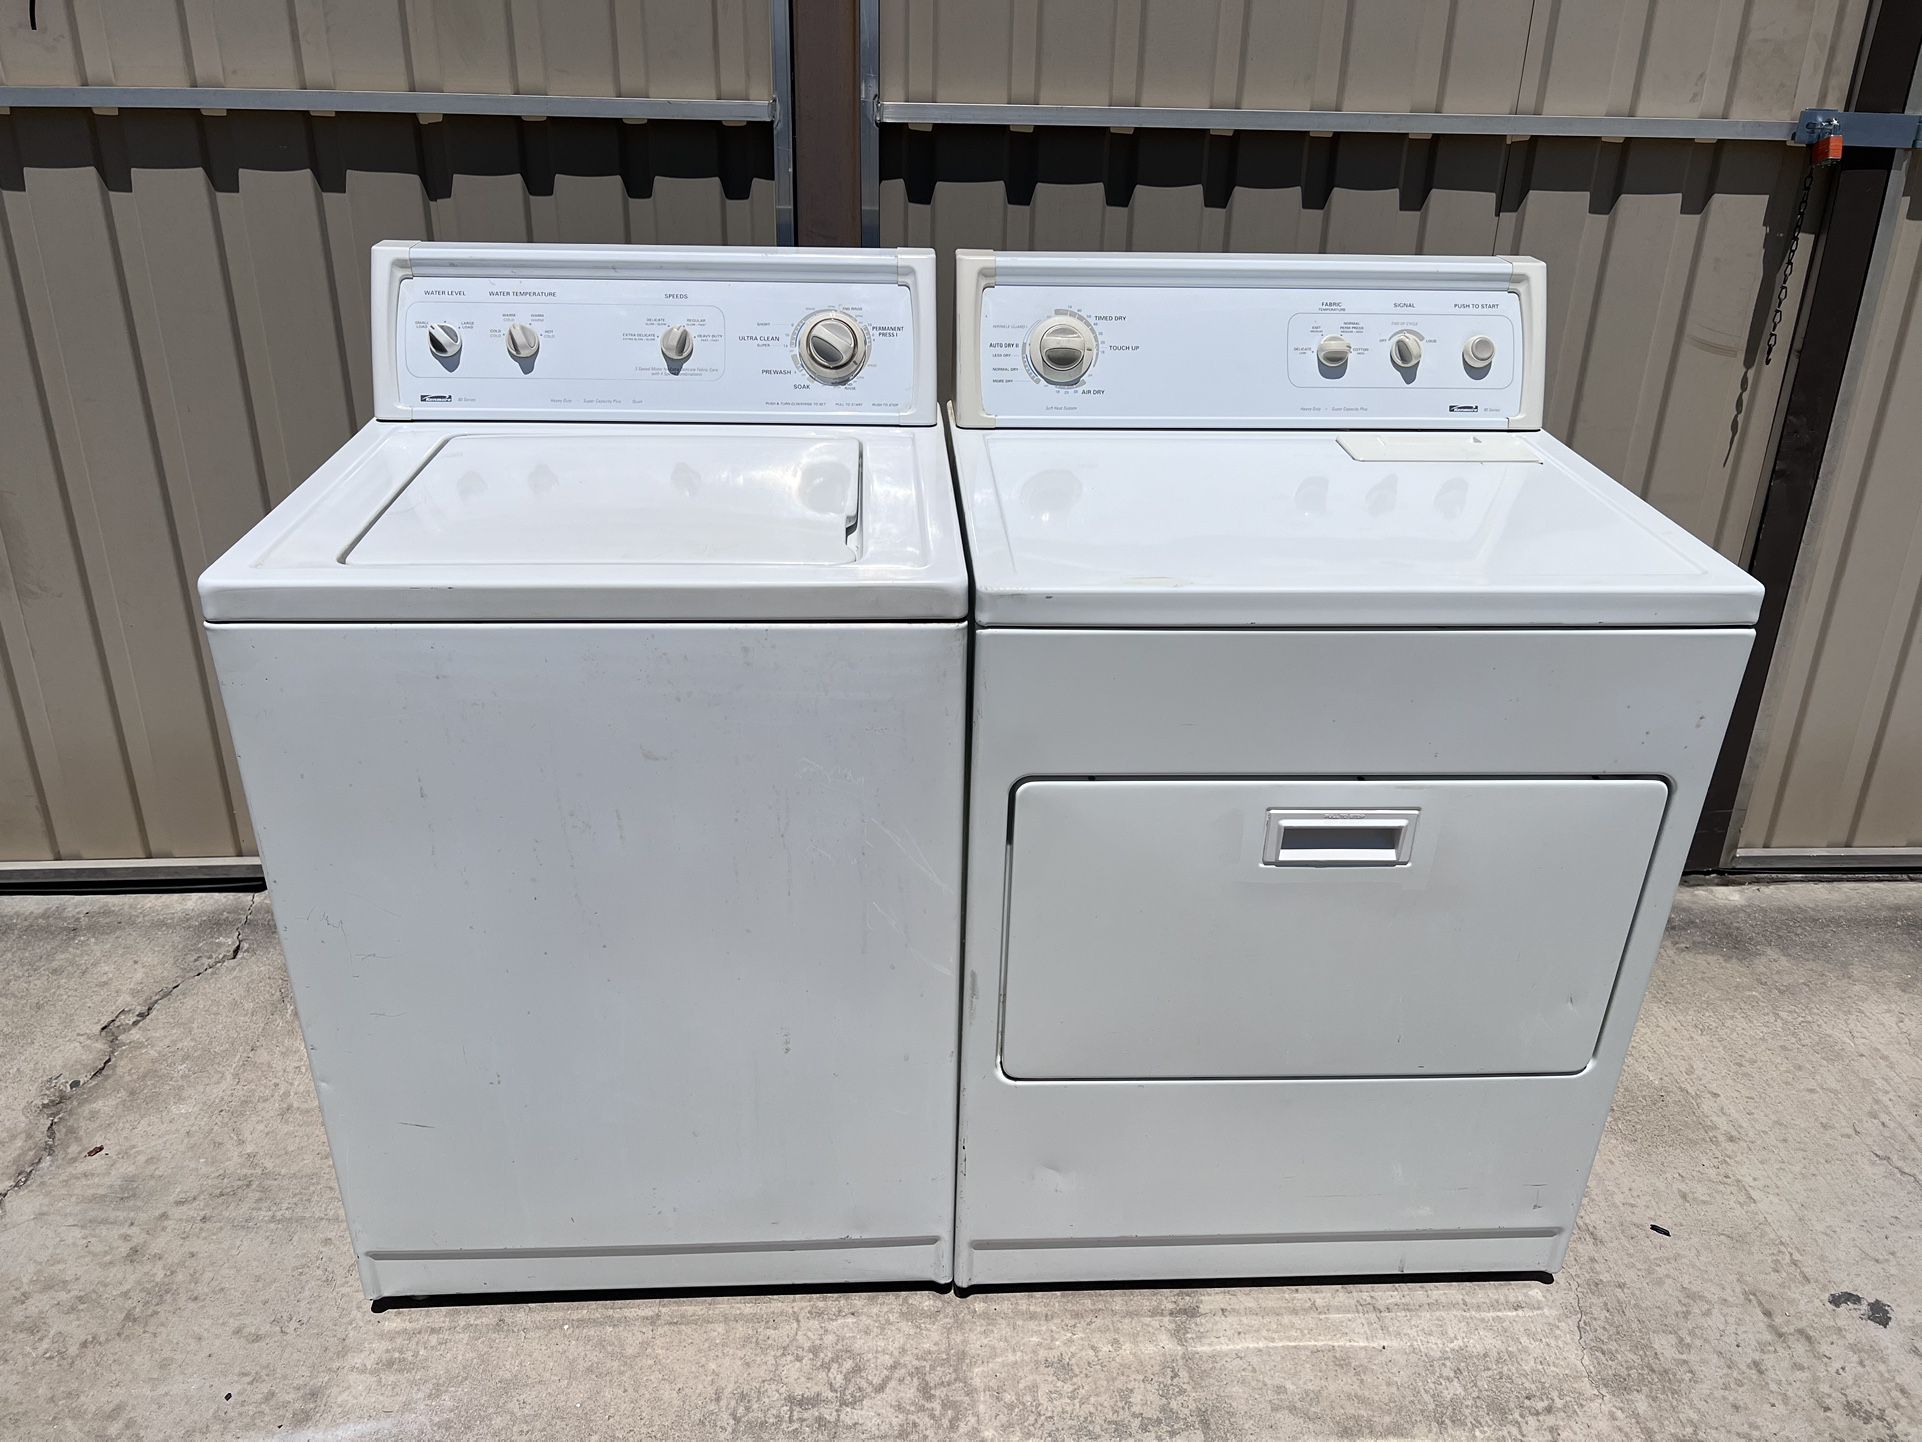 Perfect…….WASHER - DRYER SET!